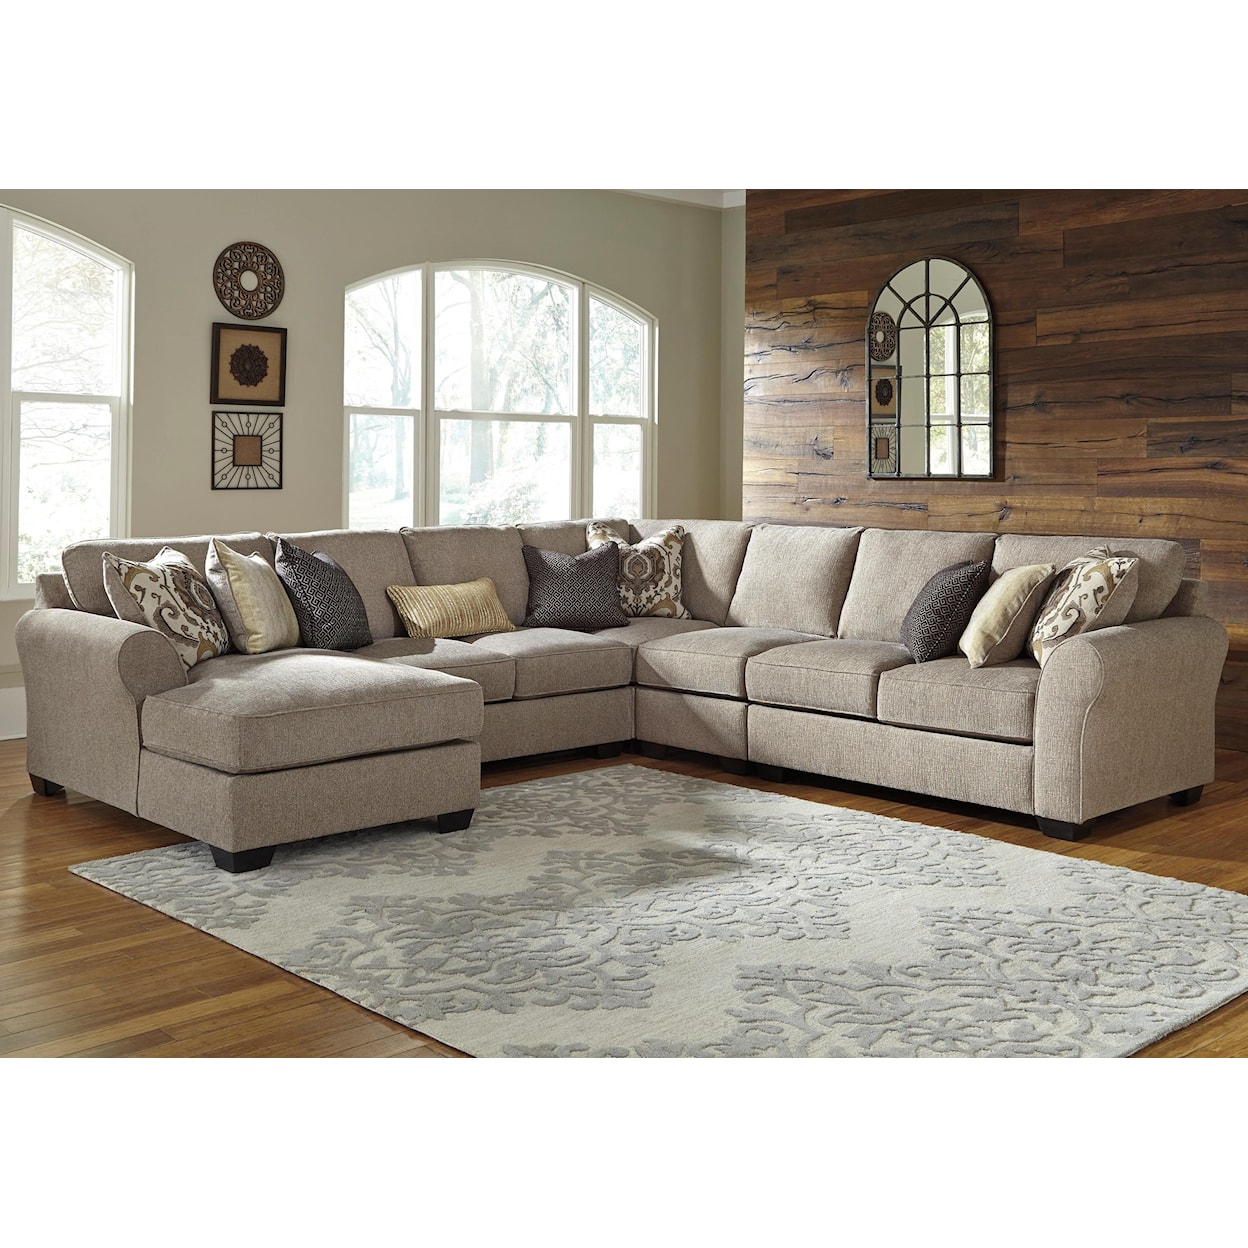 Benchcraft Pantomine 5-Piece Sectional with Chaise